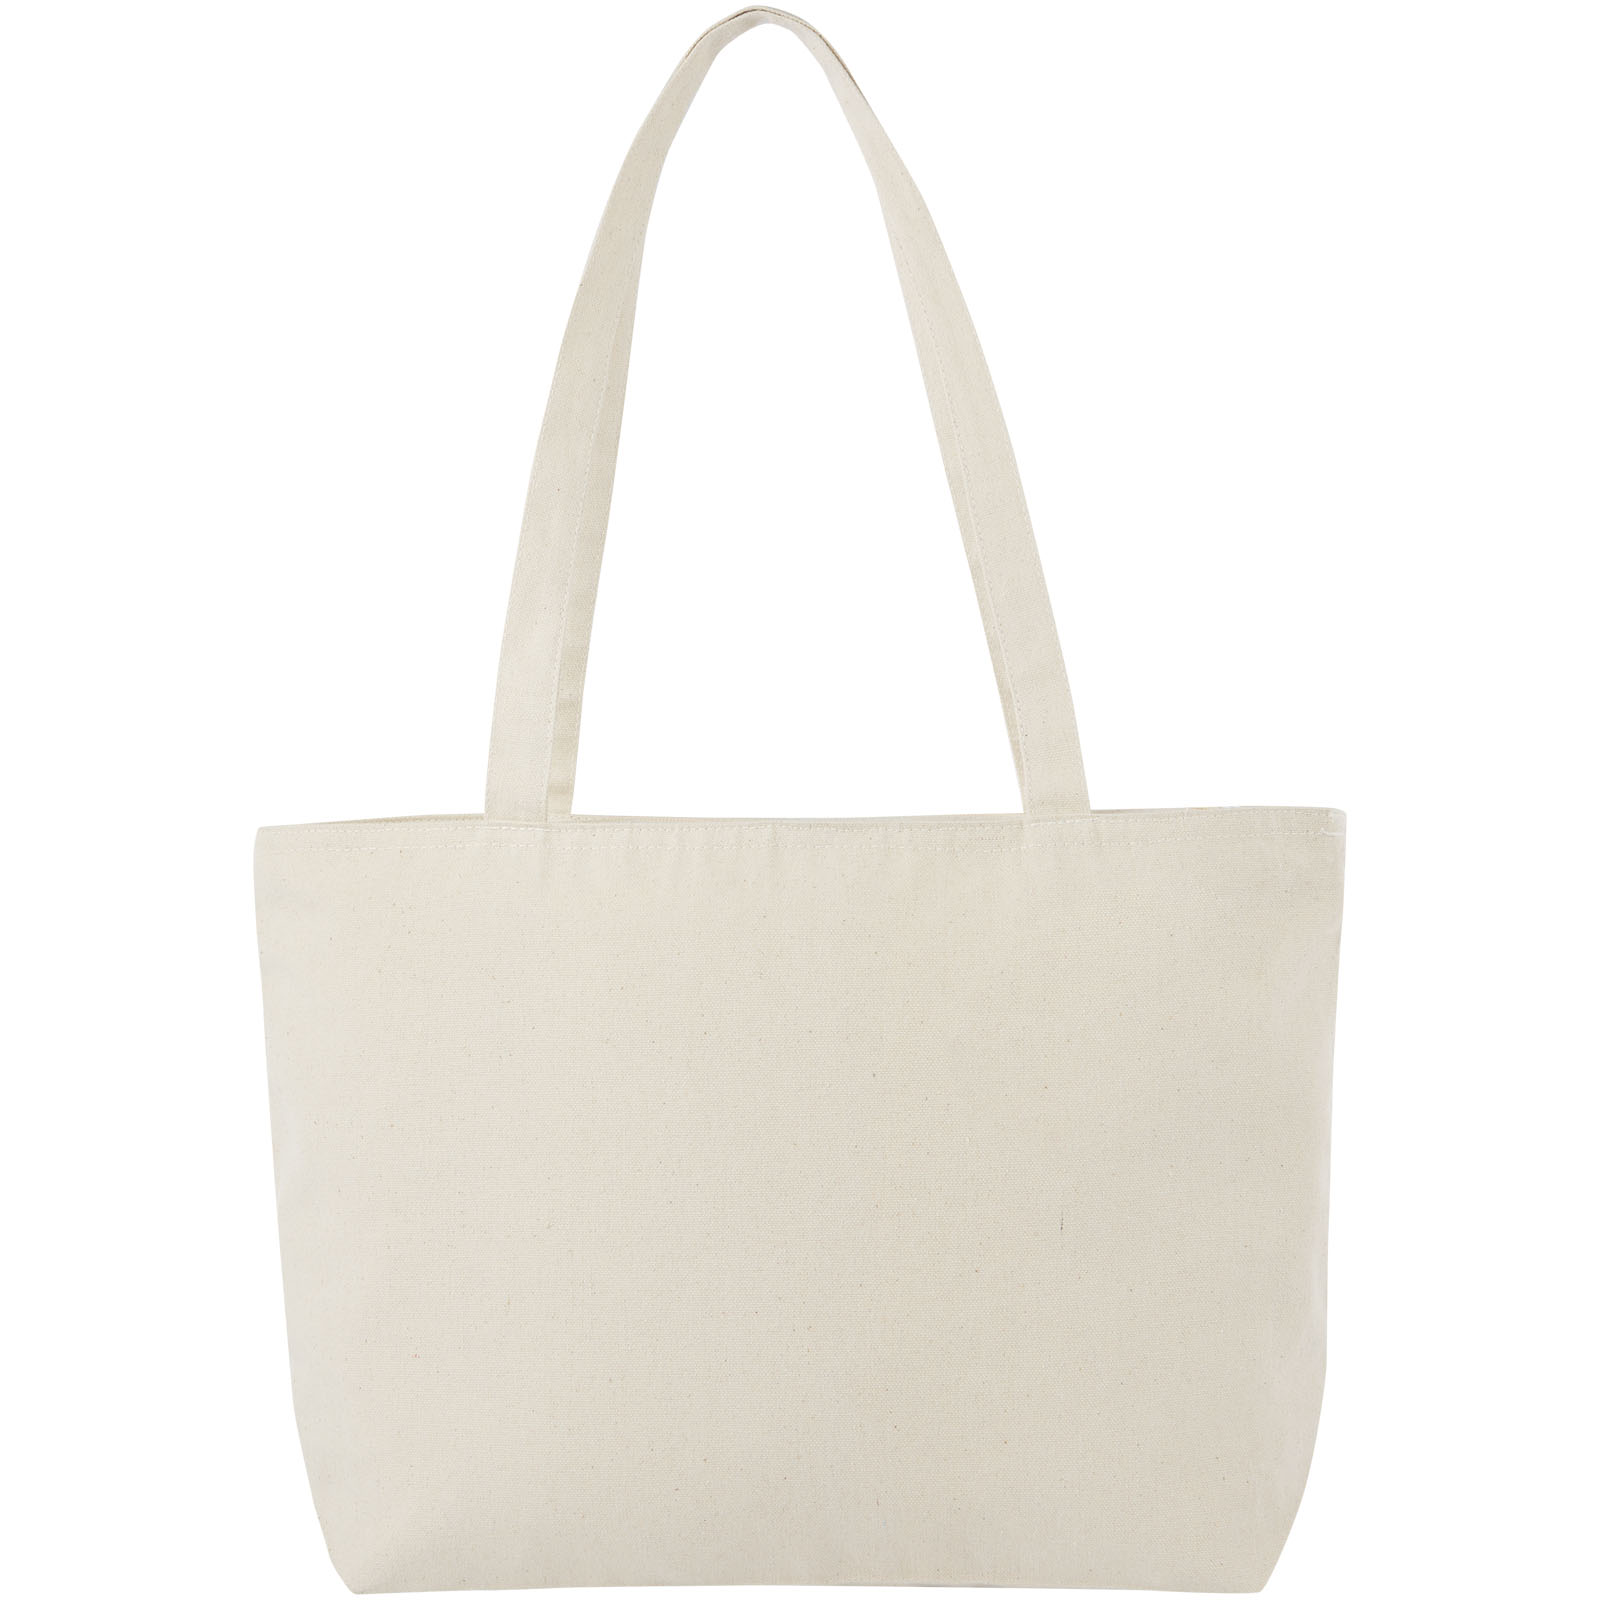 Advertising Cotton Bags - Ningbo 320 g/m² zippered cotton tote bag 15L - 2